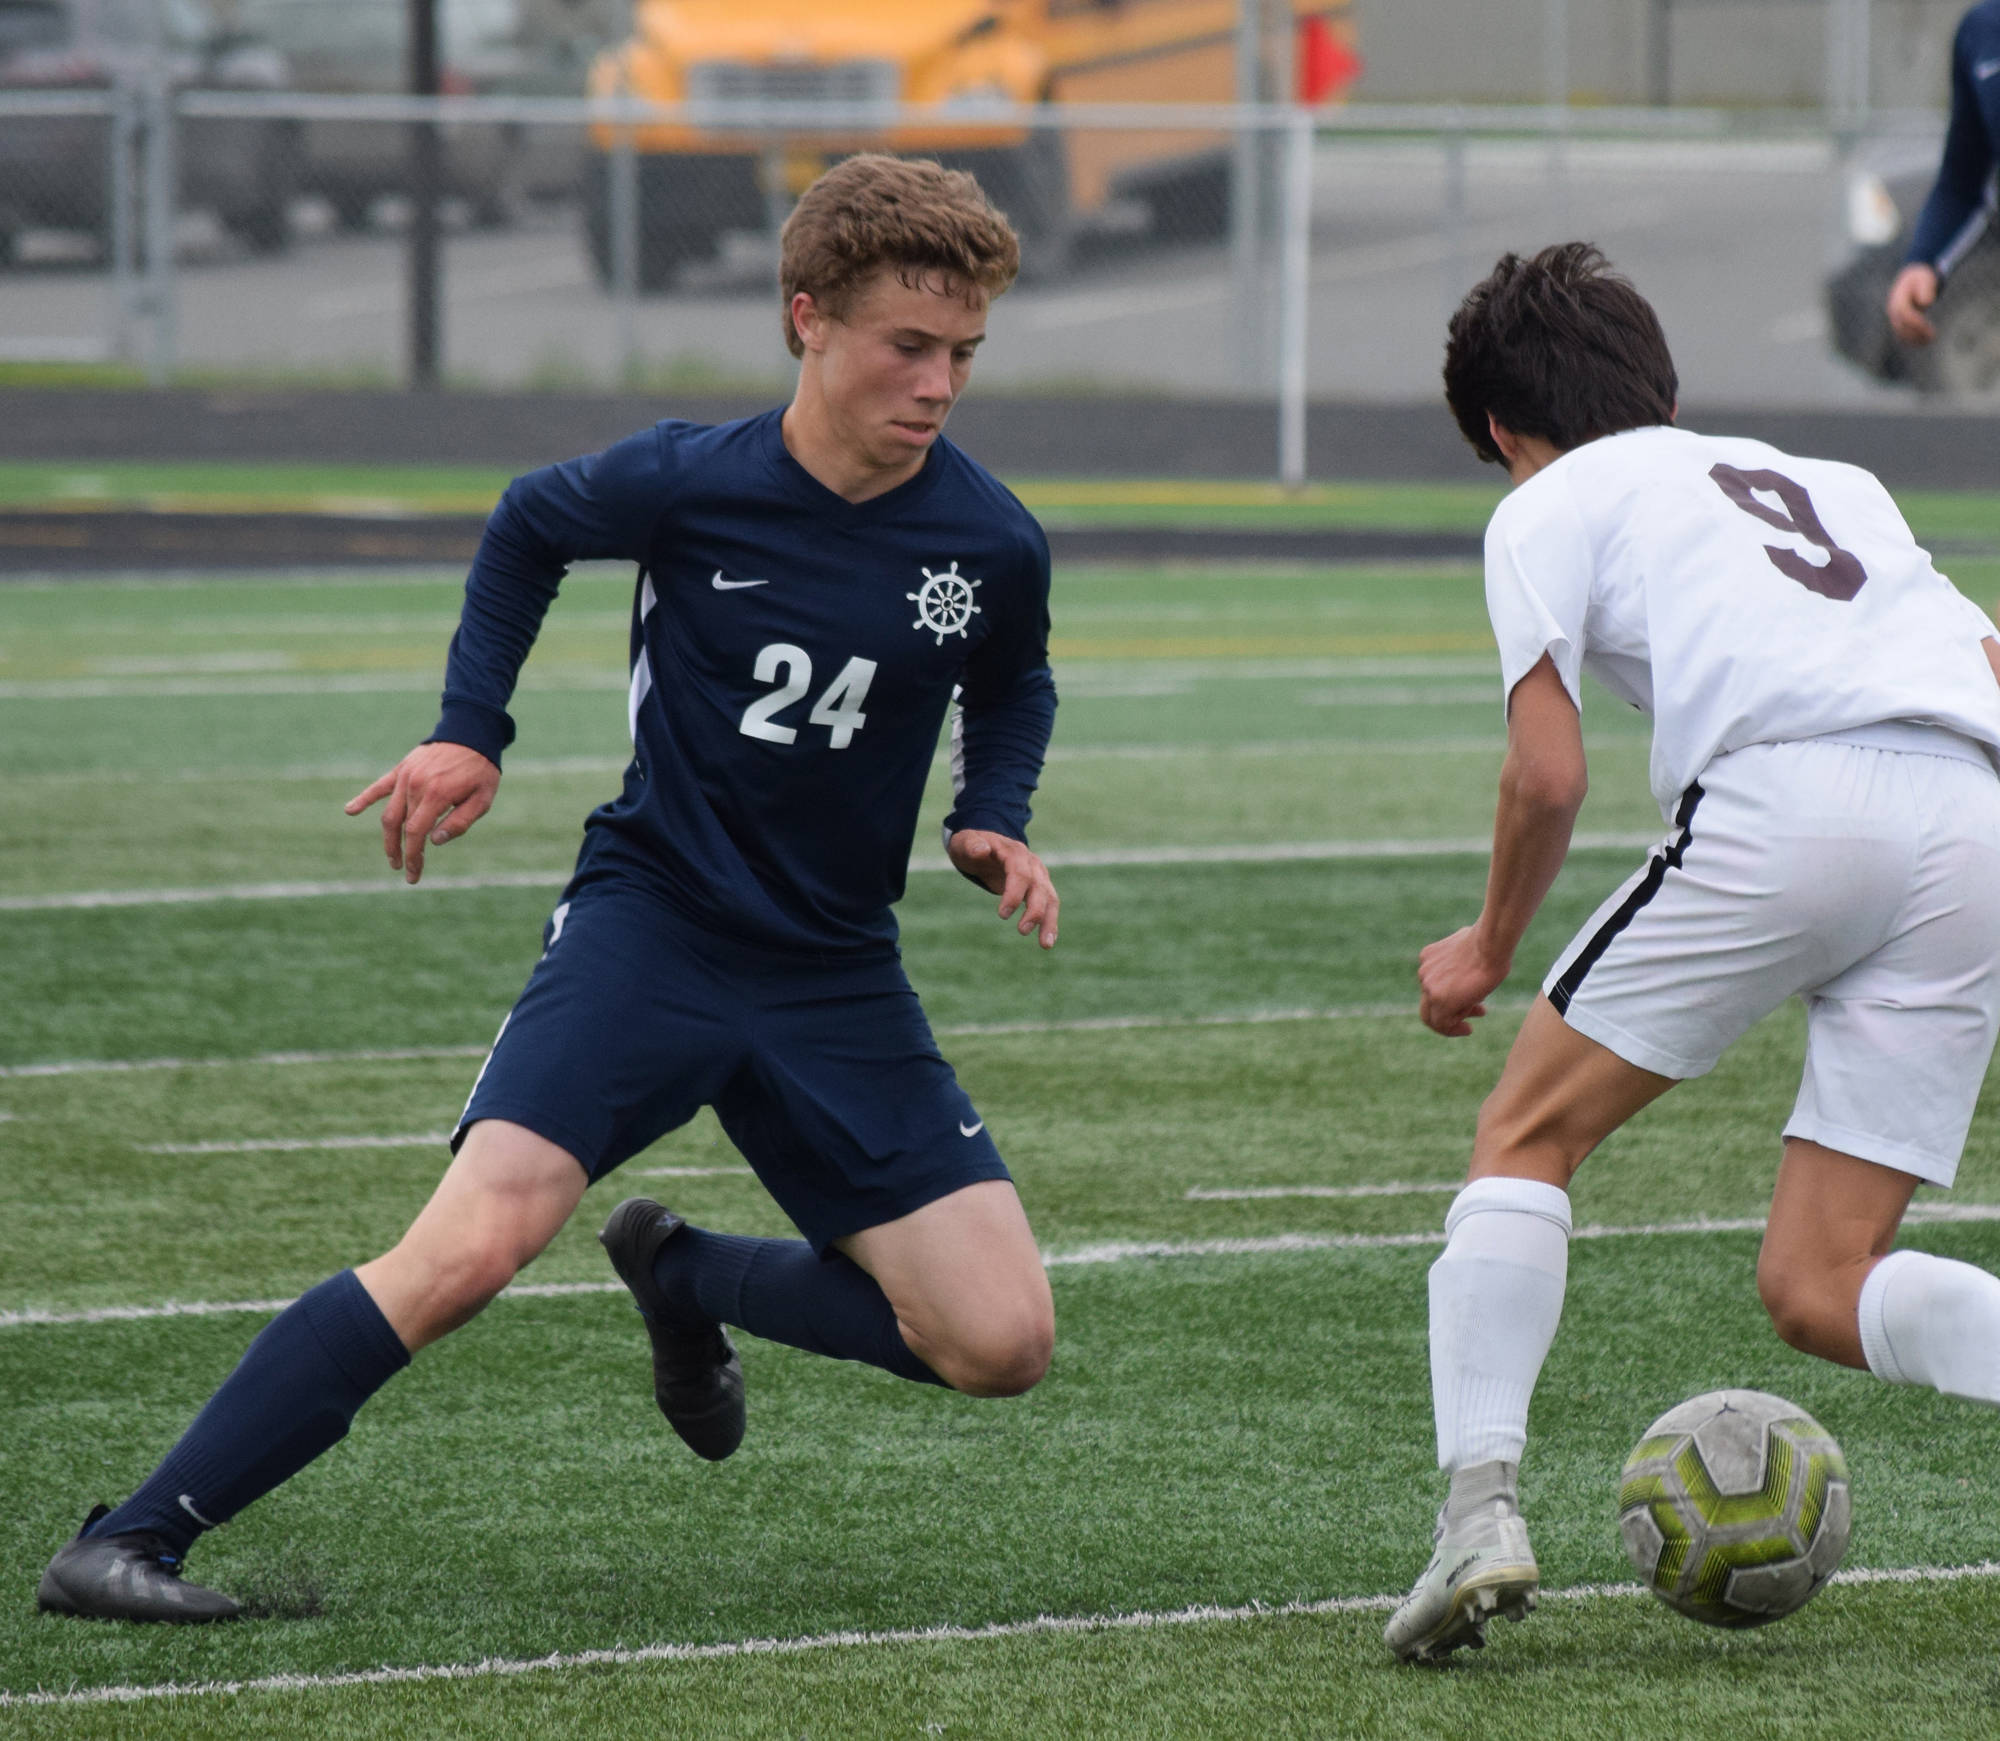 Homer’s Austin Shafford (left) defends a move by Ketchikan’s Apollo Jasper Thursday, May 23, 2019, at the Div. II state soccer championships at West High School. (Photo by Joey Klecka/Peninsula Clarion)